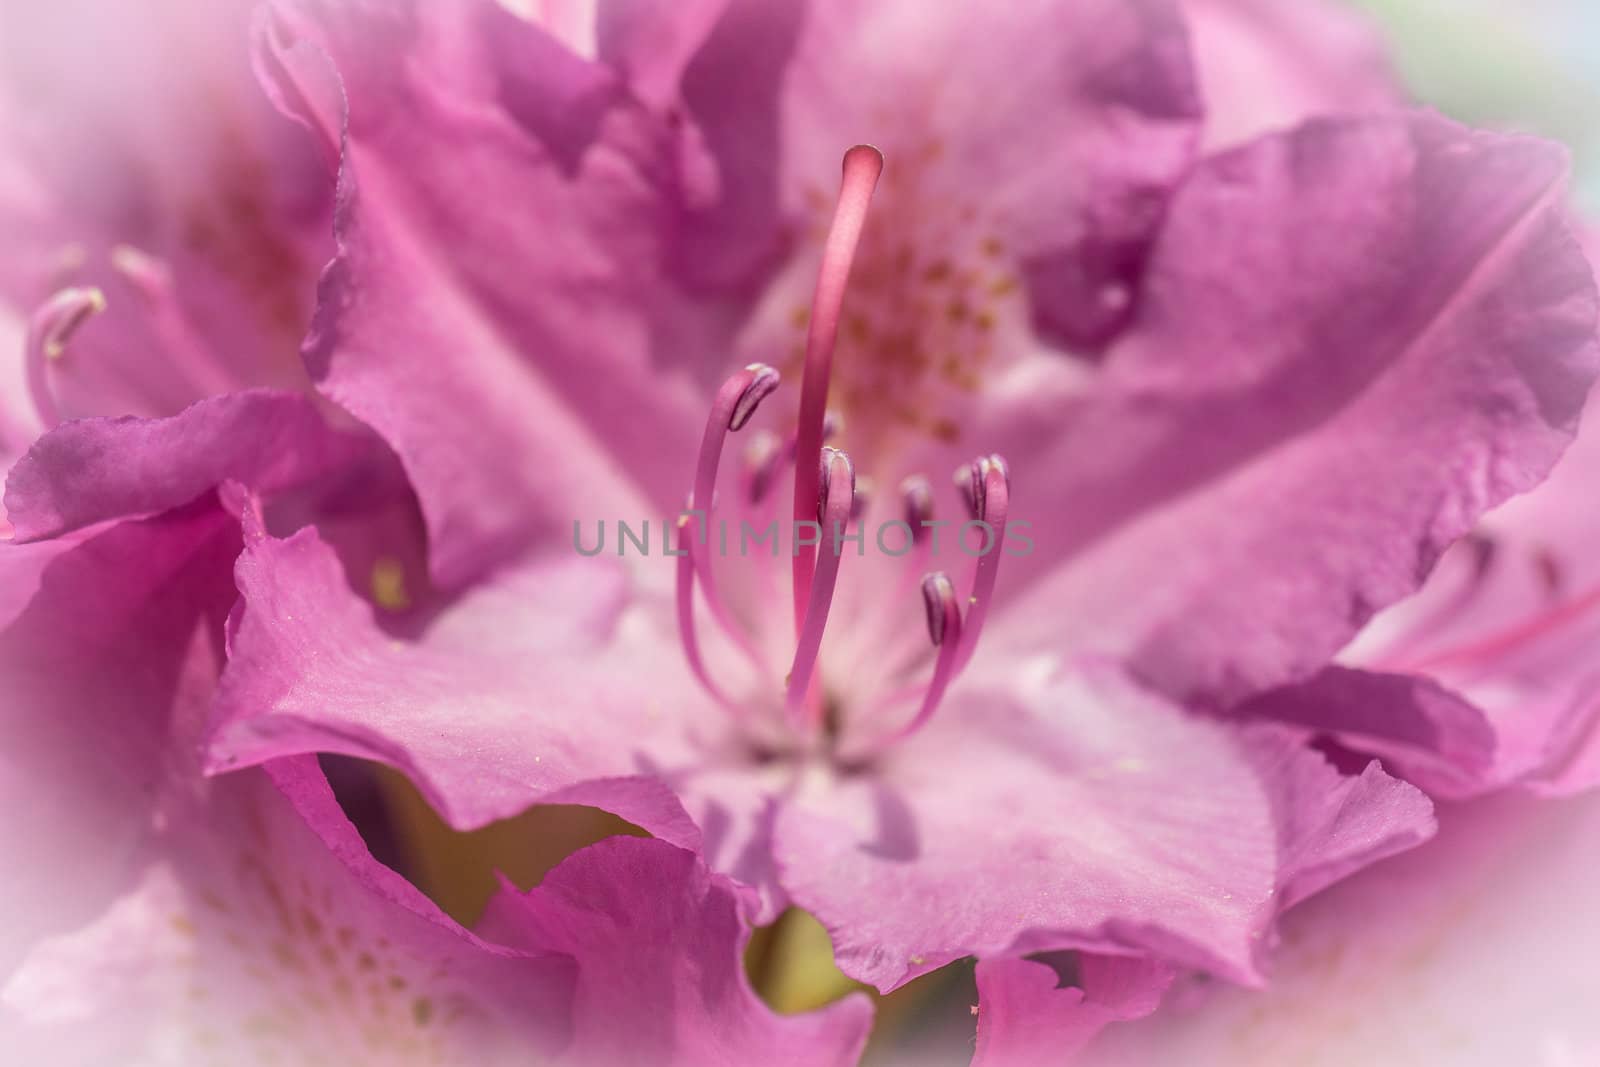 Violet flower of a rhododendron bush (Rhododendron hypoglaucum) in close-up, with bright vignette by geogif